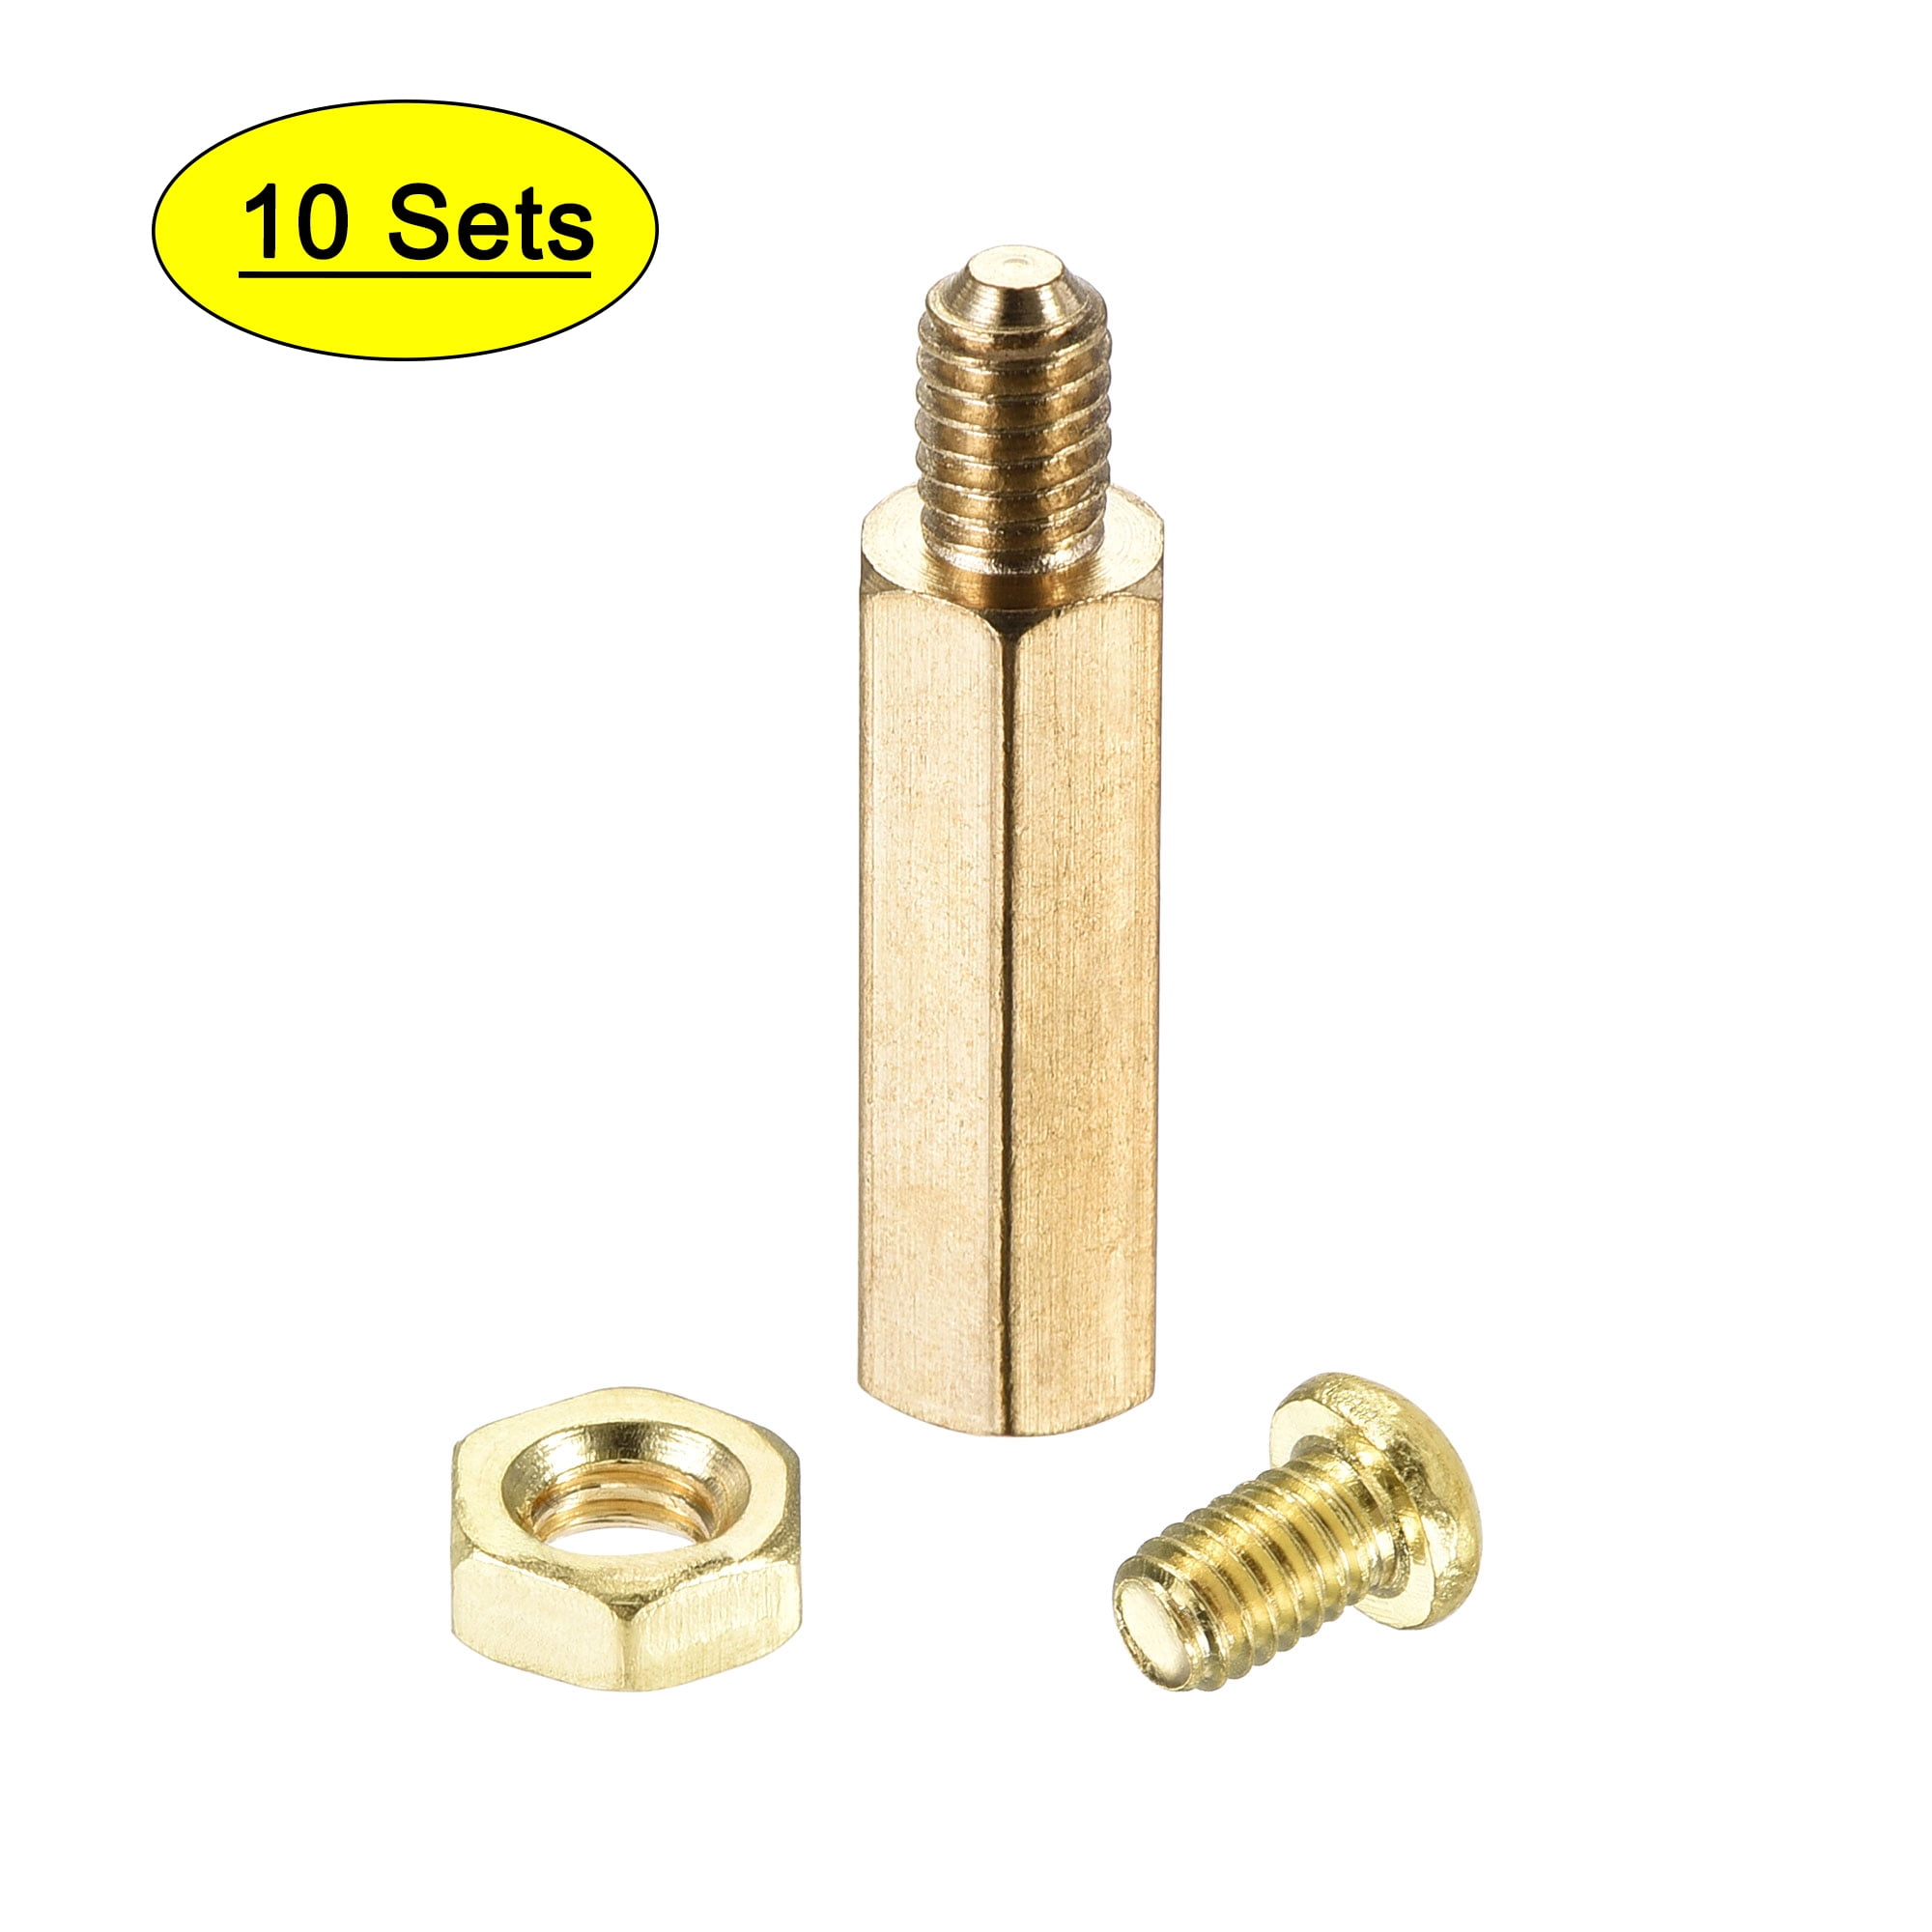 10mm M10 Brass Bolts Nuts Washers Set *4 Pack* Good Quality Length-30mm 